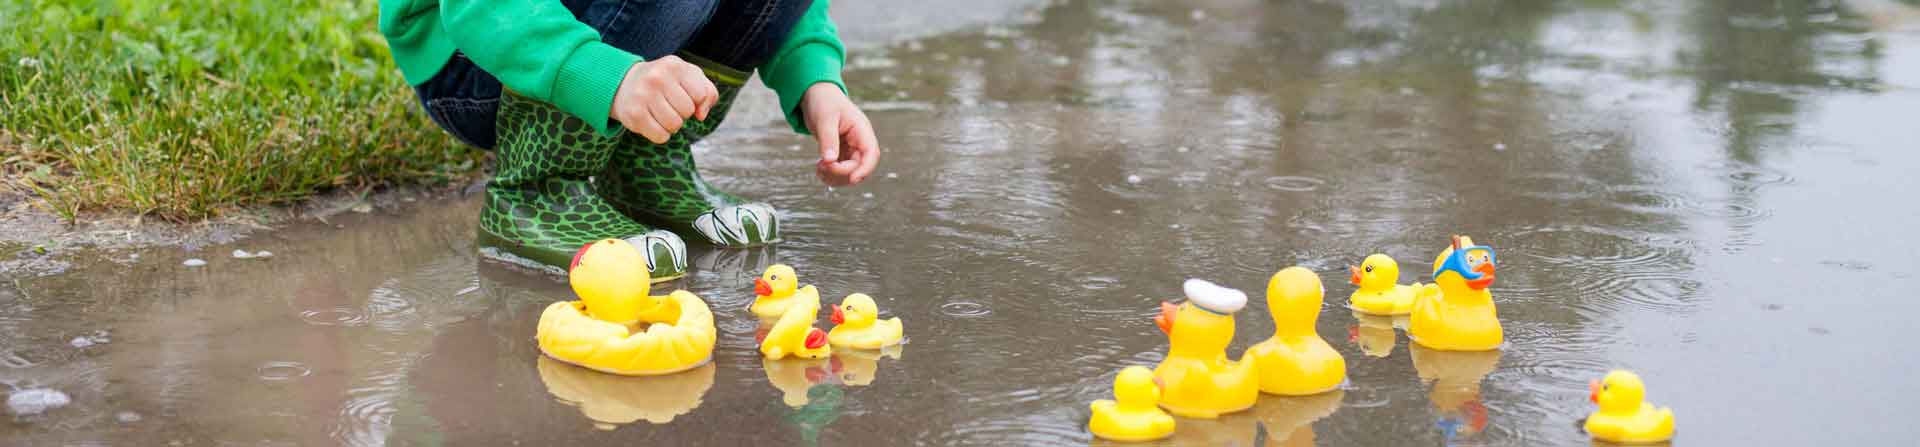 young child playing with rubber ducks in a puddle